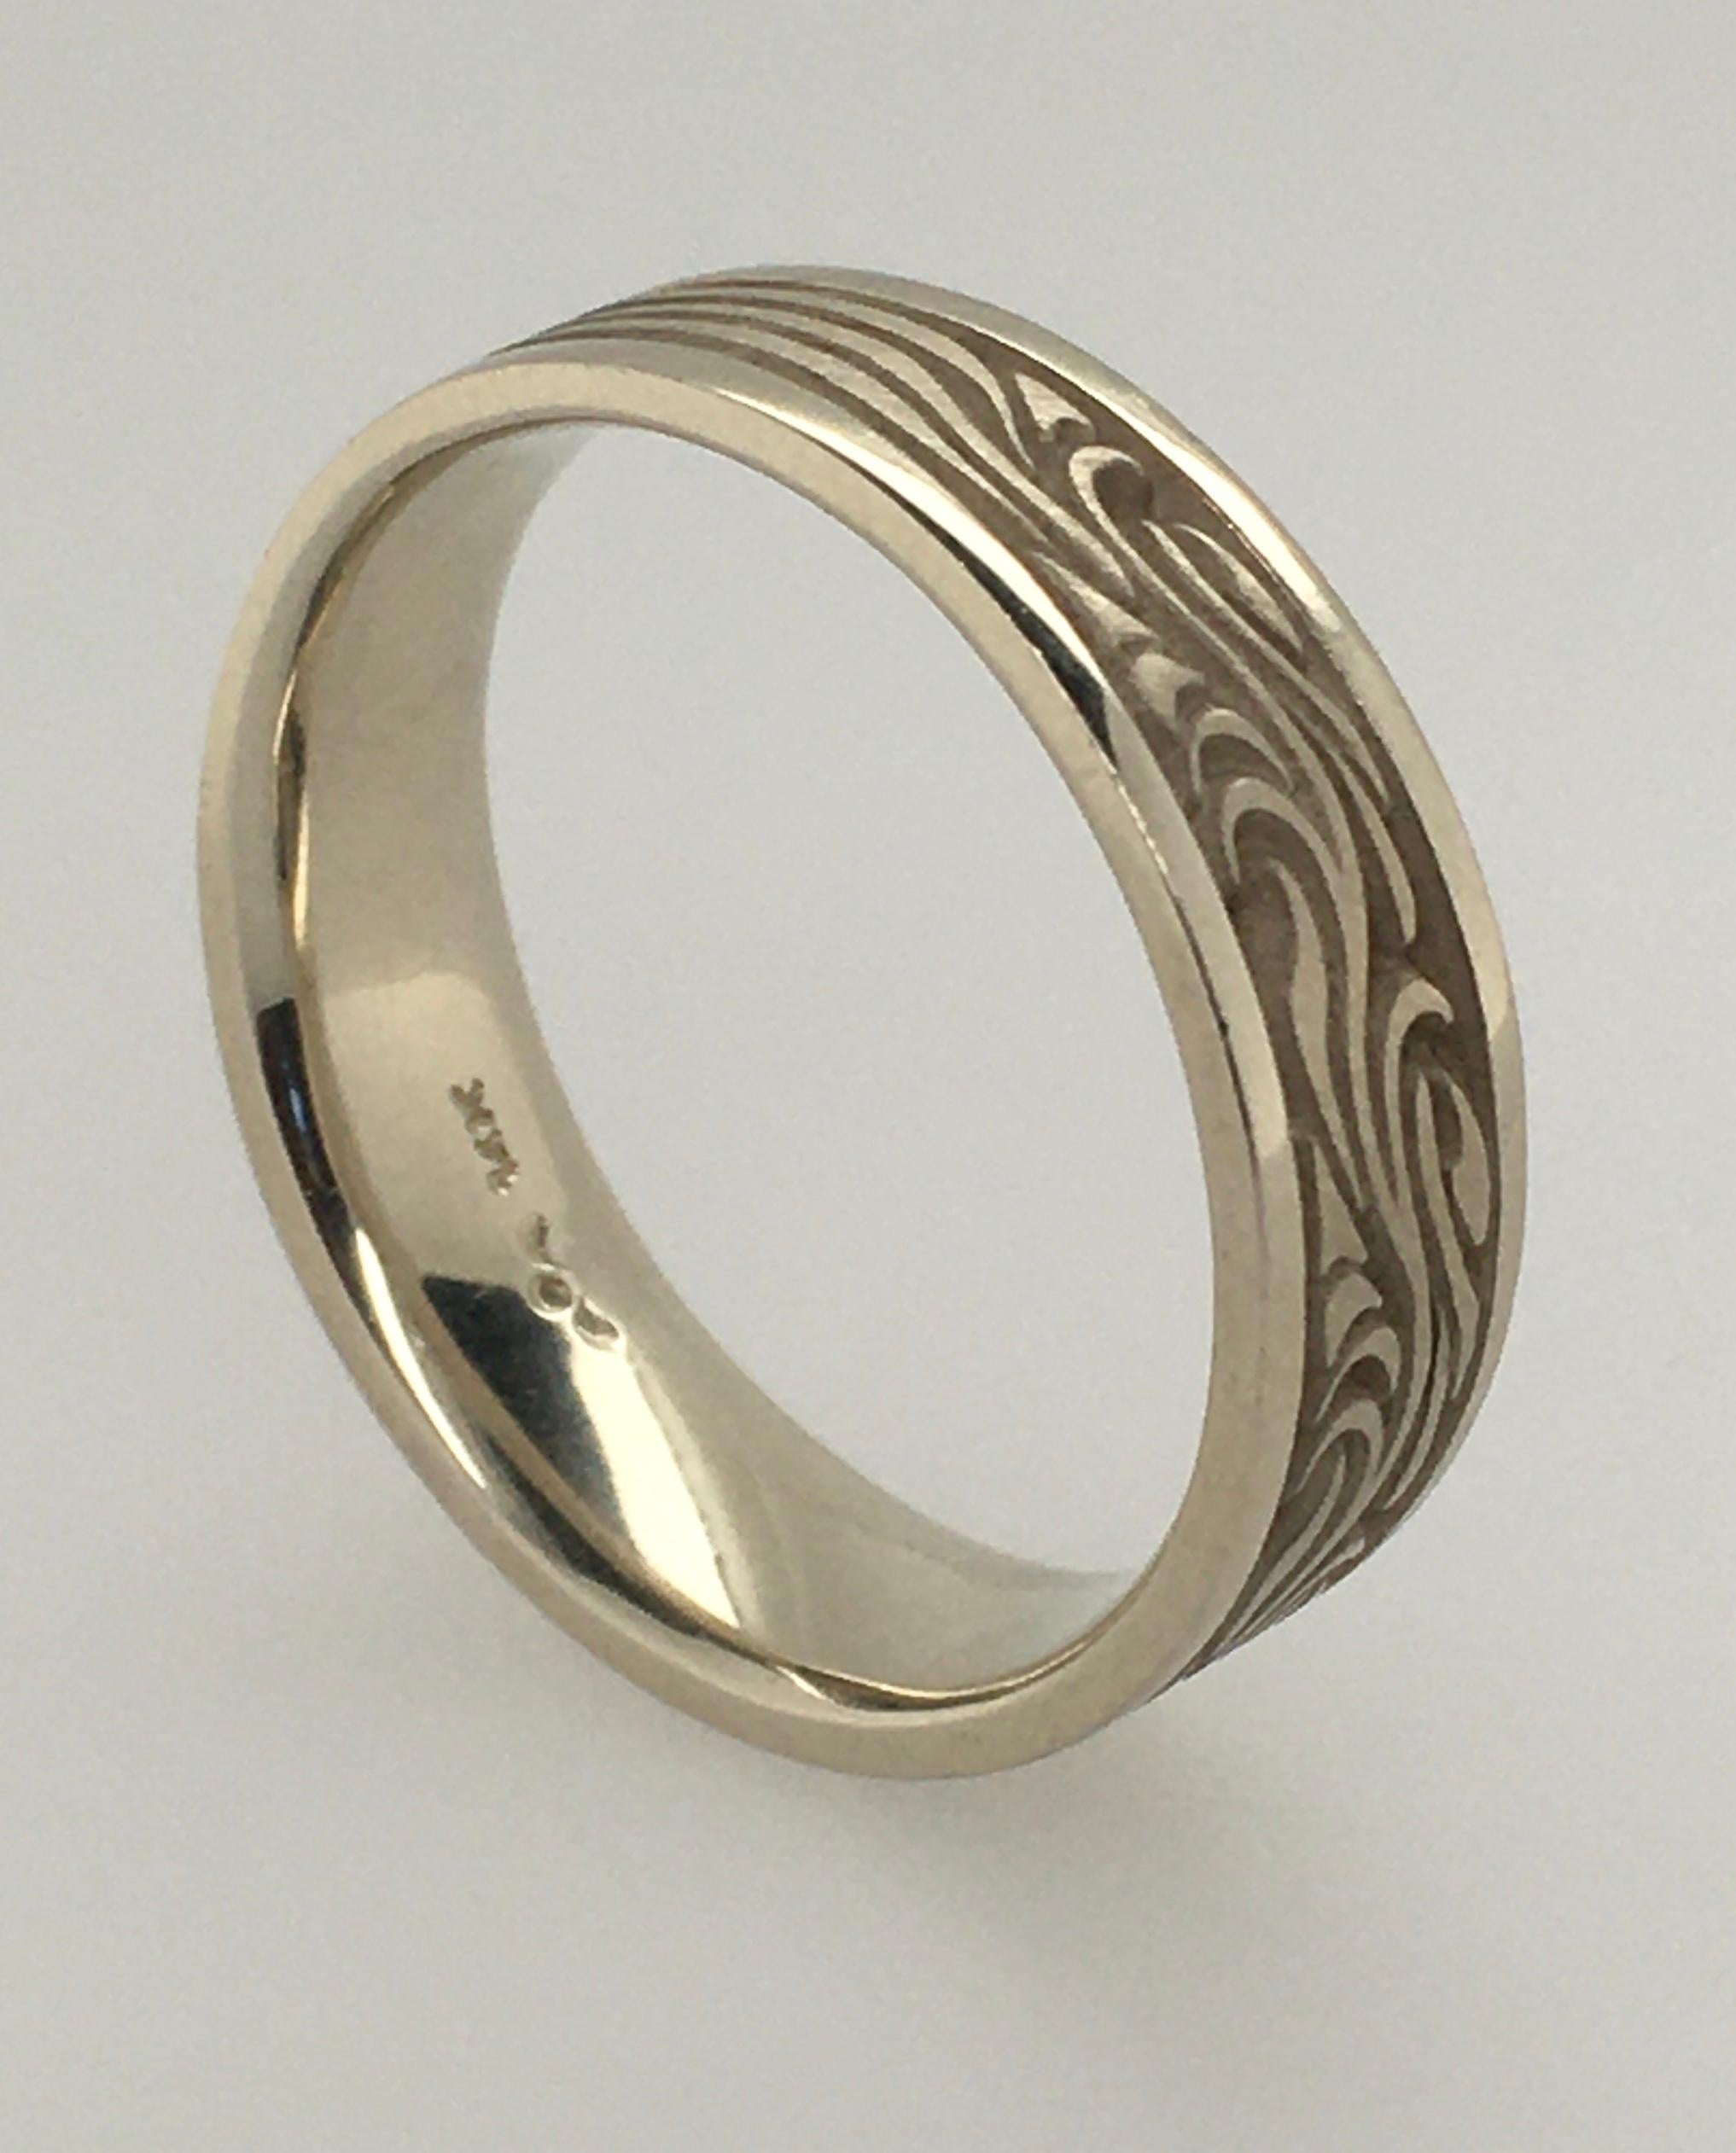 This Starry Night motif by Studio 331 is a 6.75 mm men's 14K white gold wedding band with flat polished rims.  As with all their rings, Studio 311 purposefully designs for Comfort Fit. Note the band's intricate Starry Night design that tapers